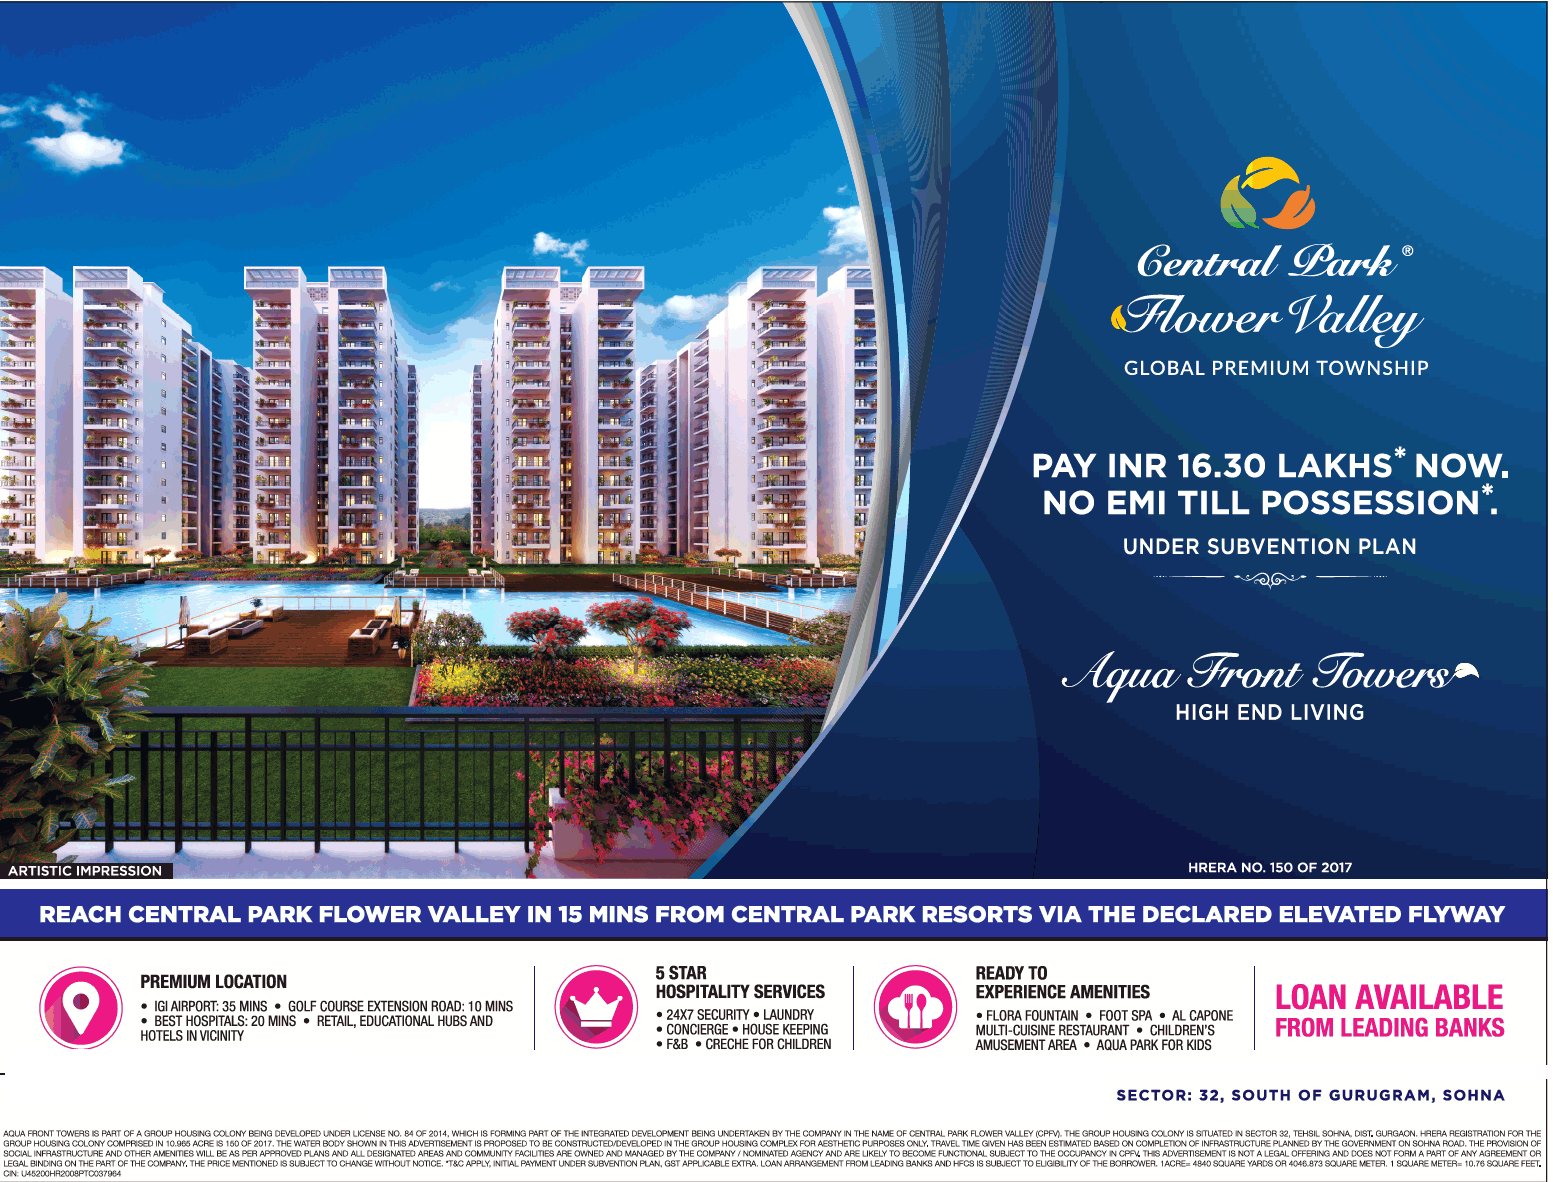 Pay No EMI till possession at Central Park Aqua Front Tower  in Gurgaon Update